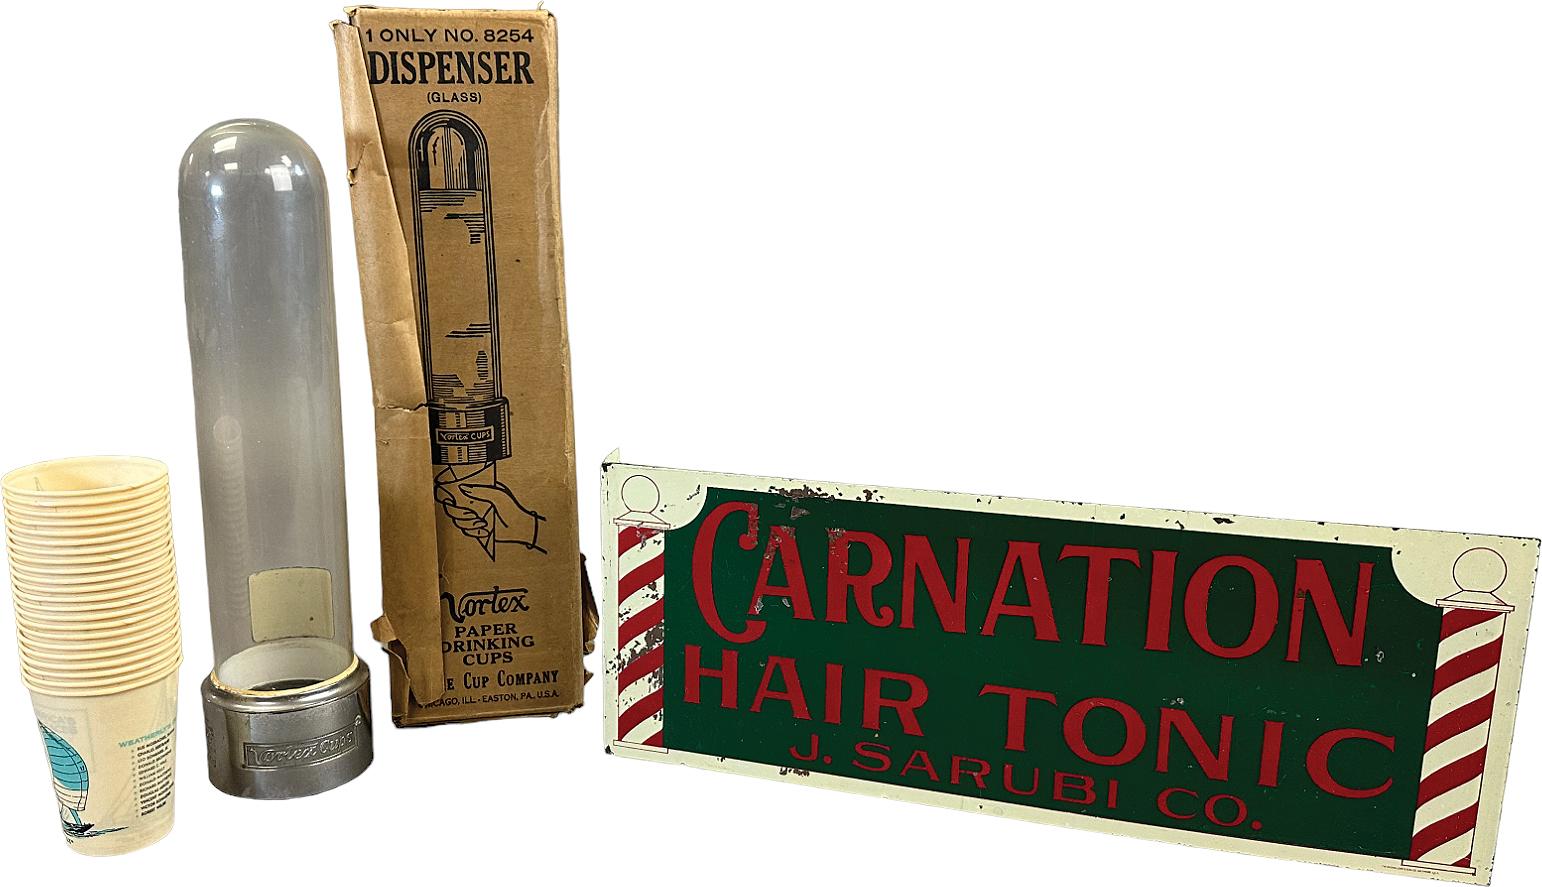 BOXED VORTEX CUP DISPENSER & CARNATION HAIR TONIC